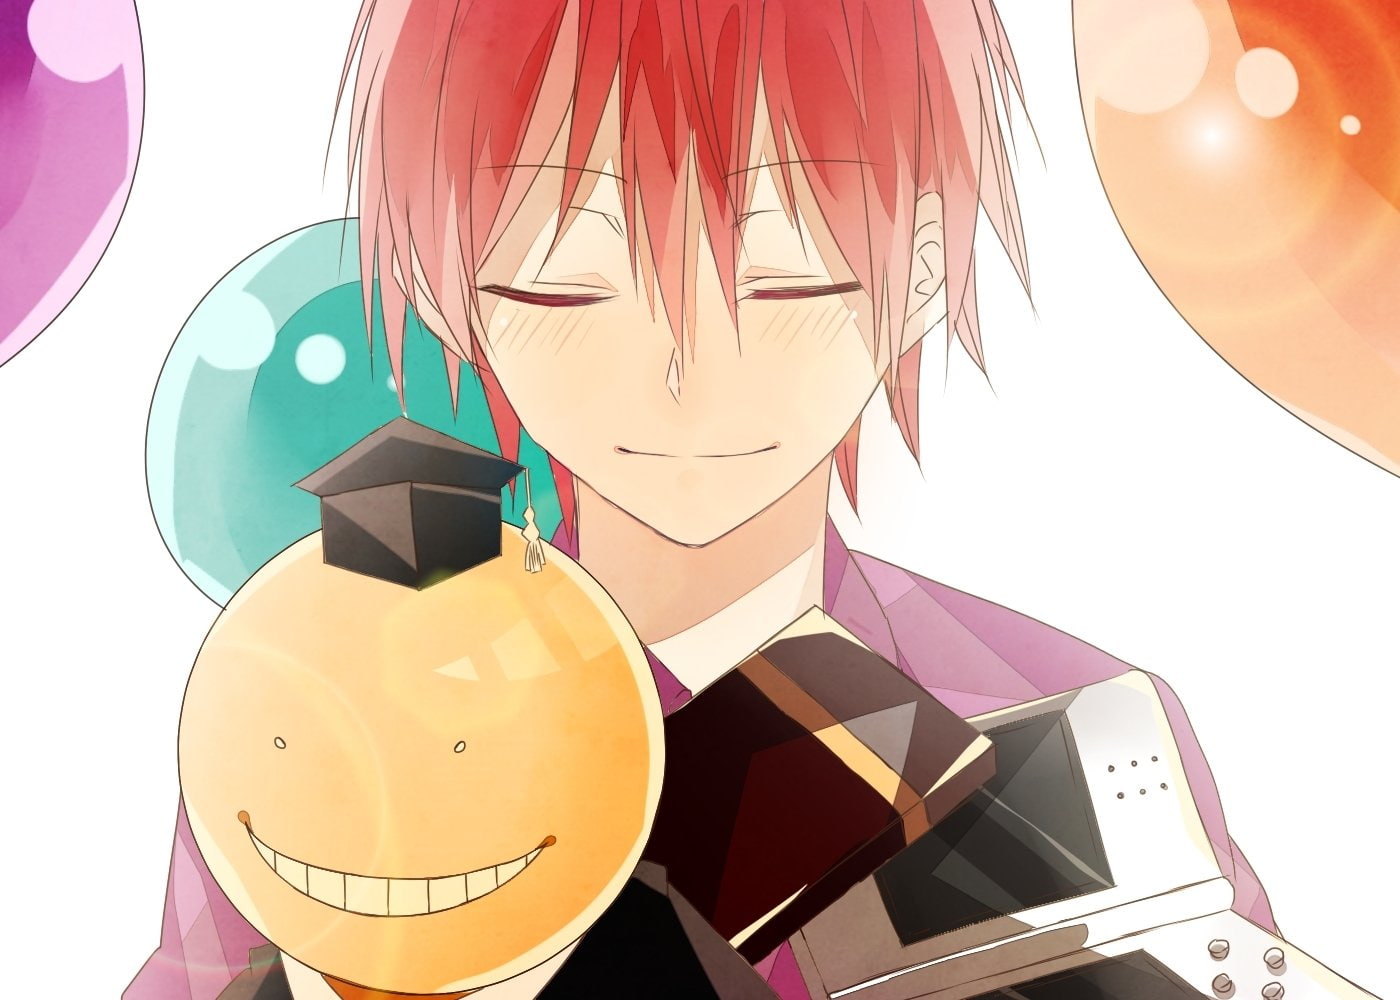 pink-haired man anime character illustration, Assassination Classroom